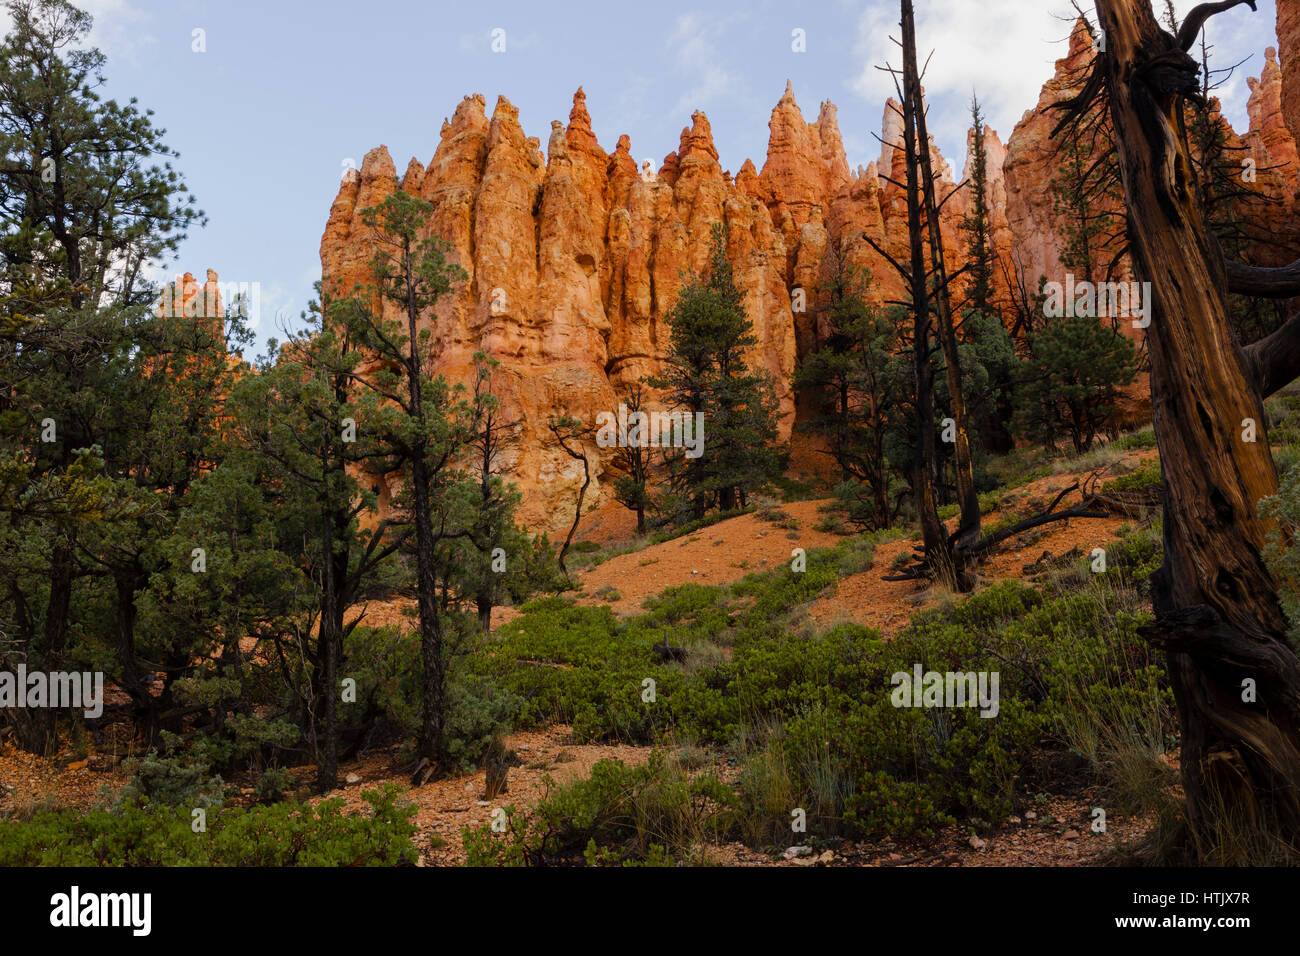 Silent City rock formation, Bryce Canyon National Park, Utah, USA Banque D'Images